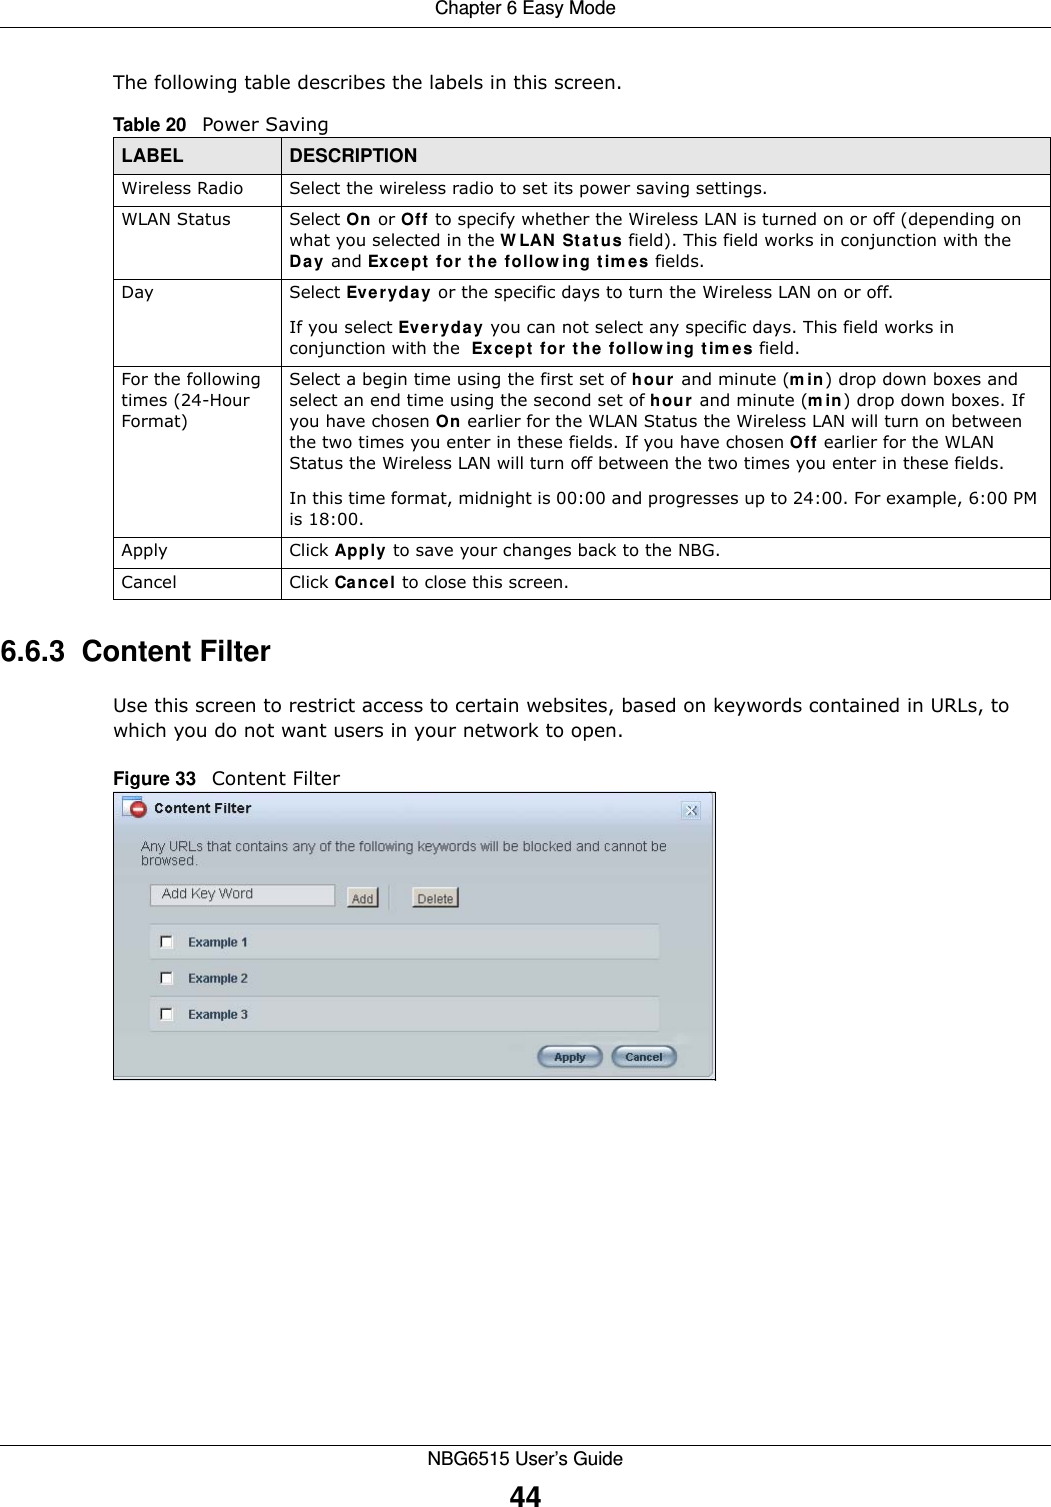 Chapter 6 Easy ModeNBG6515 User’s Guide44The following table describes the labels in this screen.6.6.3  Content FilterUse this screen to restrict access to certain websites, based on keywords contained in URLs, to which you do not want users in your network to open.Figure 33   Content Filter Table 20   Power Saving LABEL DESCRIPTIONWireless Radio Select the wireless radio to set its power saving settings.WLAN Status Select On or Off to specify whether the Wireless LAN is turned on or off (depending on what you selected in the WLAN Status field). This field works in conjunction with the Day and Except for the following times fields.Day Select Everyday or the specific days to turn the Wireless LAN on or off. If you select Everyday you can not select any specific days. This field works in conjunction with the  Except for the following times field.For the following times (24-Hour Format)Select a begin time using the first set of hour and minute (min) drop down boxes and select an end time using the second set of hour and minute (min) drop down boxes. If you have chosen On earlier for the WLAN Status the Wireless LAN will turn on between the two times you enter in these fields. If you have chosen Off earlier for the WLAN Status the Wireless LAN will turn off between the two times you enter in these fields. In this time format, midnight is 00:00 and progresses up to 24:00. For example, 6:00 PM is 18:00.Apply Click Apply to save your changes back to the NBG.Cancel Click Cancel to close this screen.